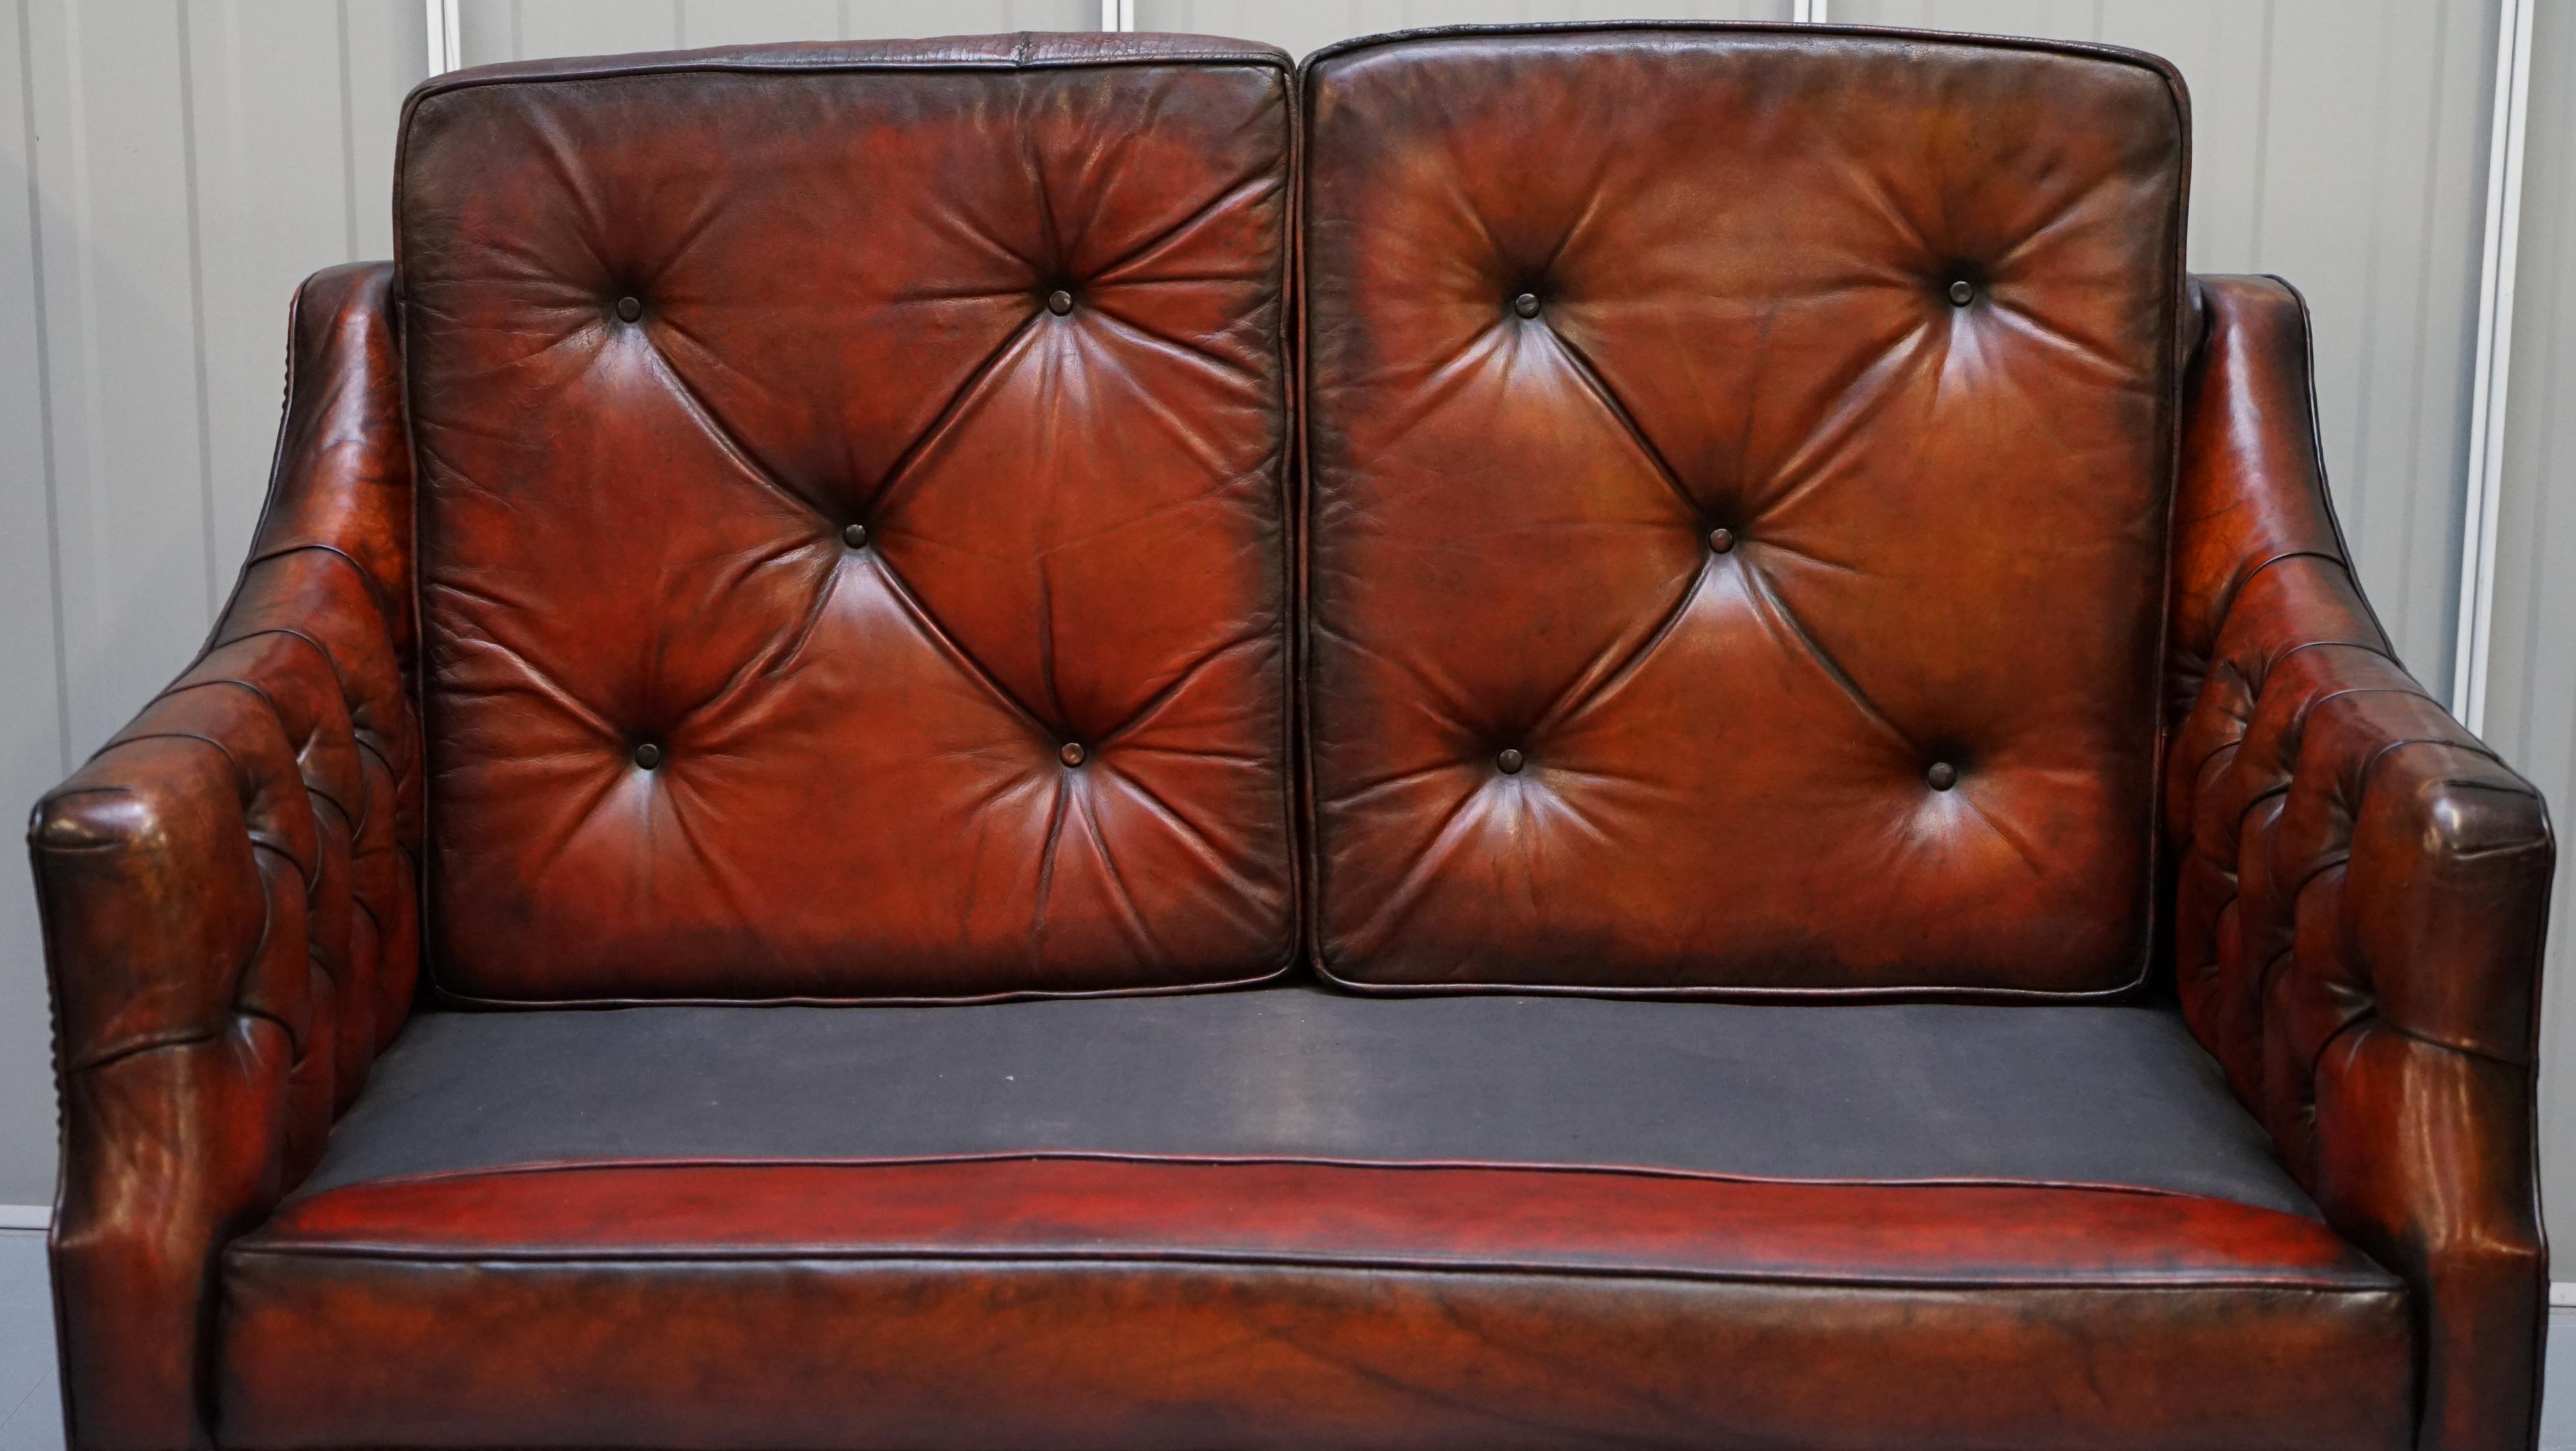 Fully Restored Whisky Brown Leather Lutyen's Viceroy Sofa, circa 1900  For Sale 10